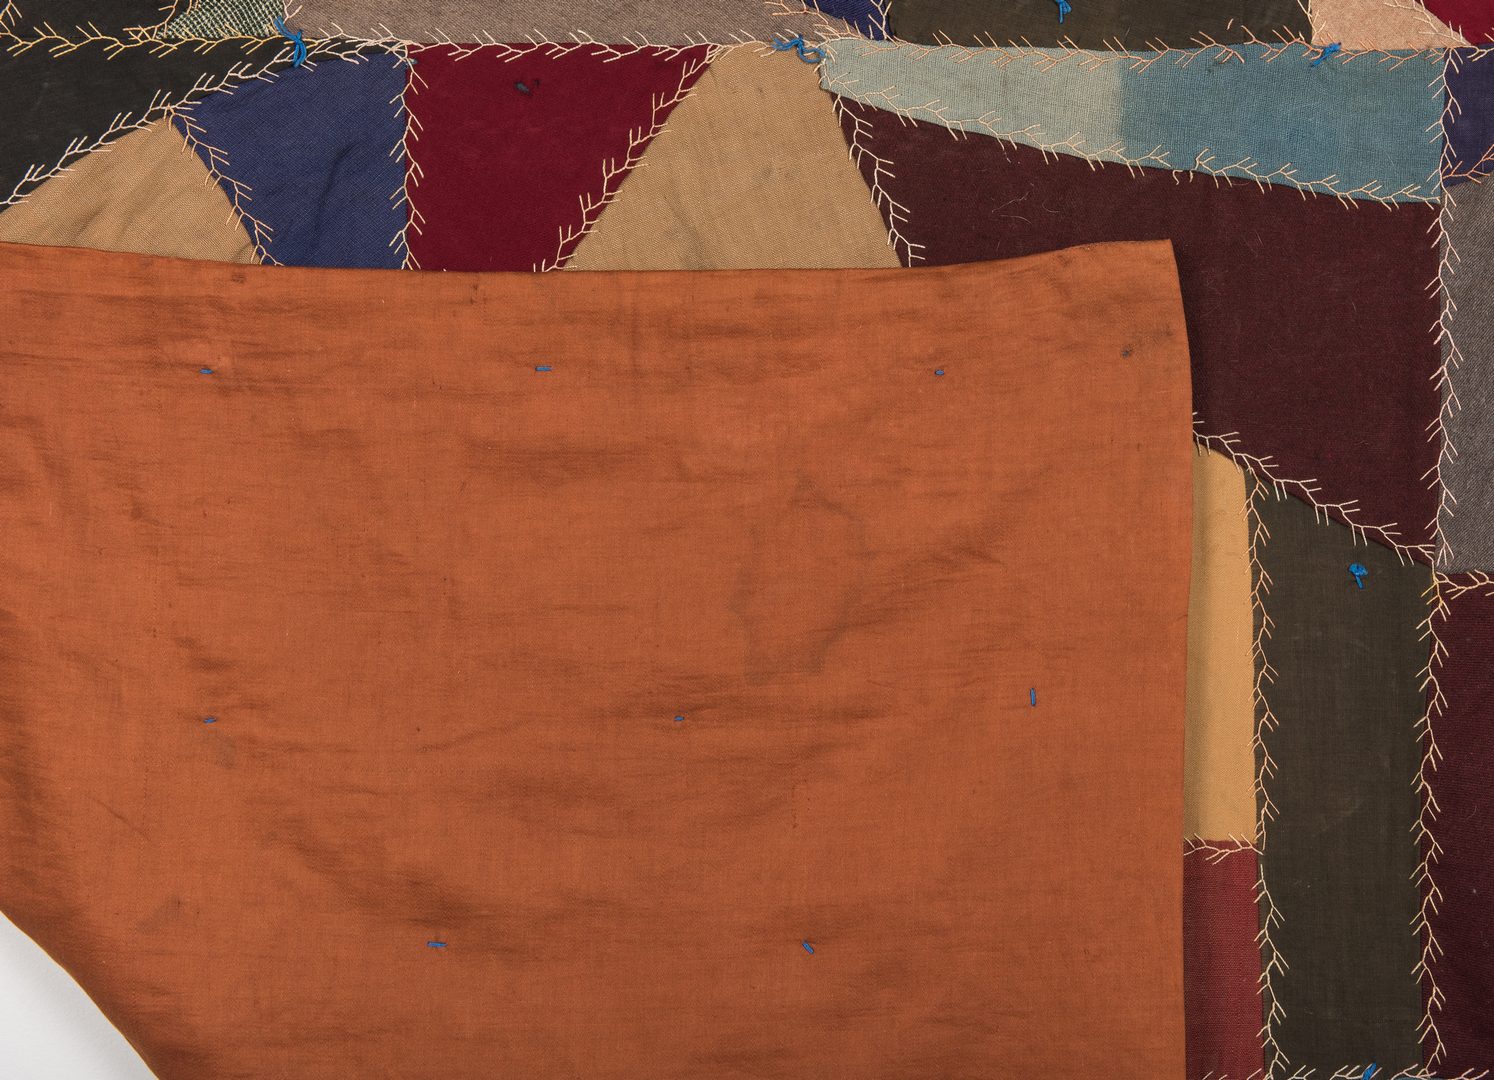 Lot 340: 3 American Quilts, Early 20th C. including Crazy Quilt